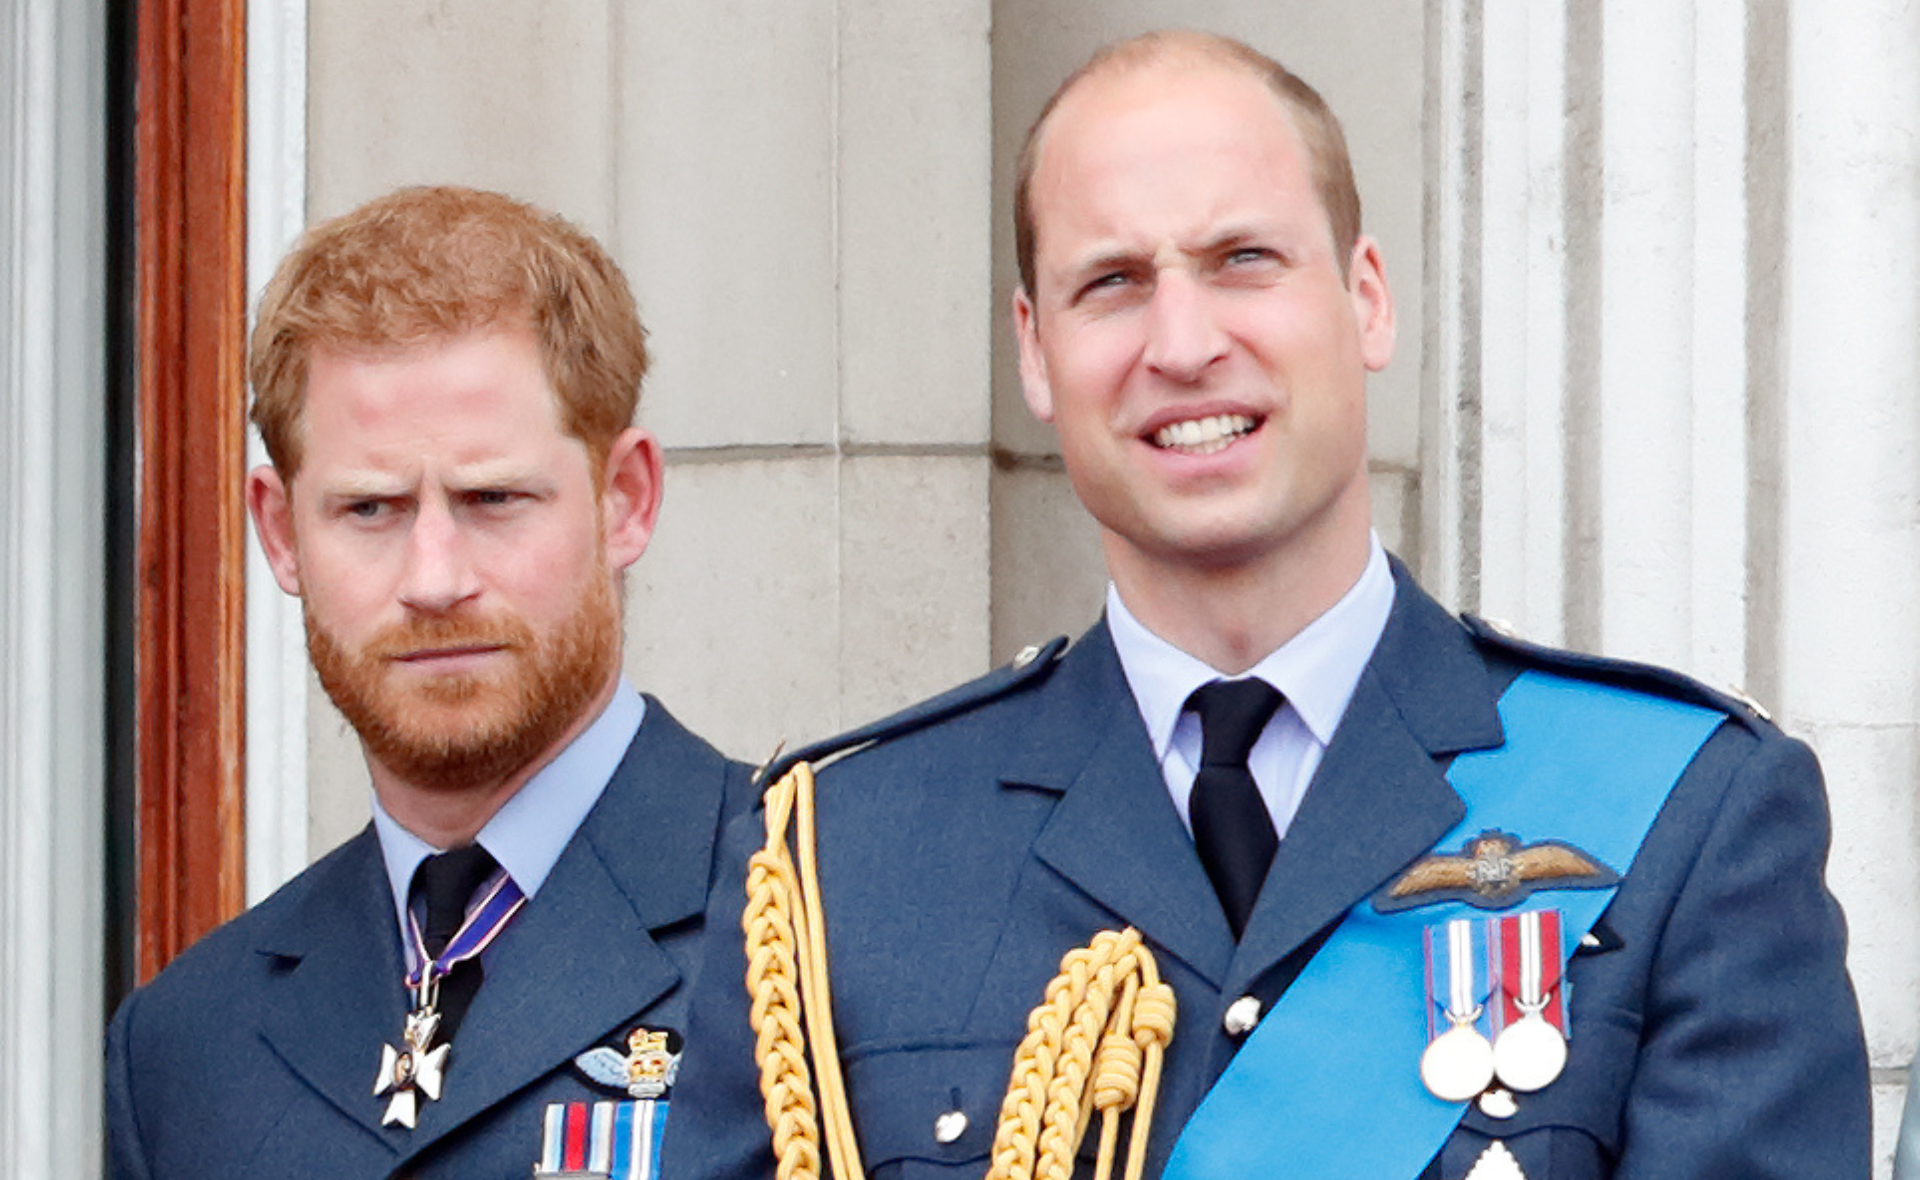 Prince William hopes to reconcile with Prince Harry in upcoming trip to Boston